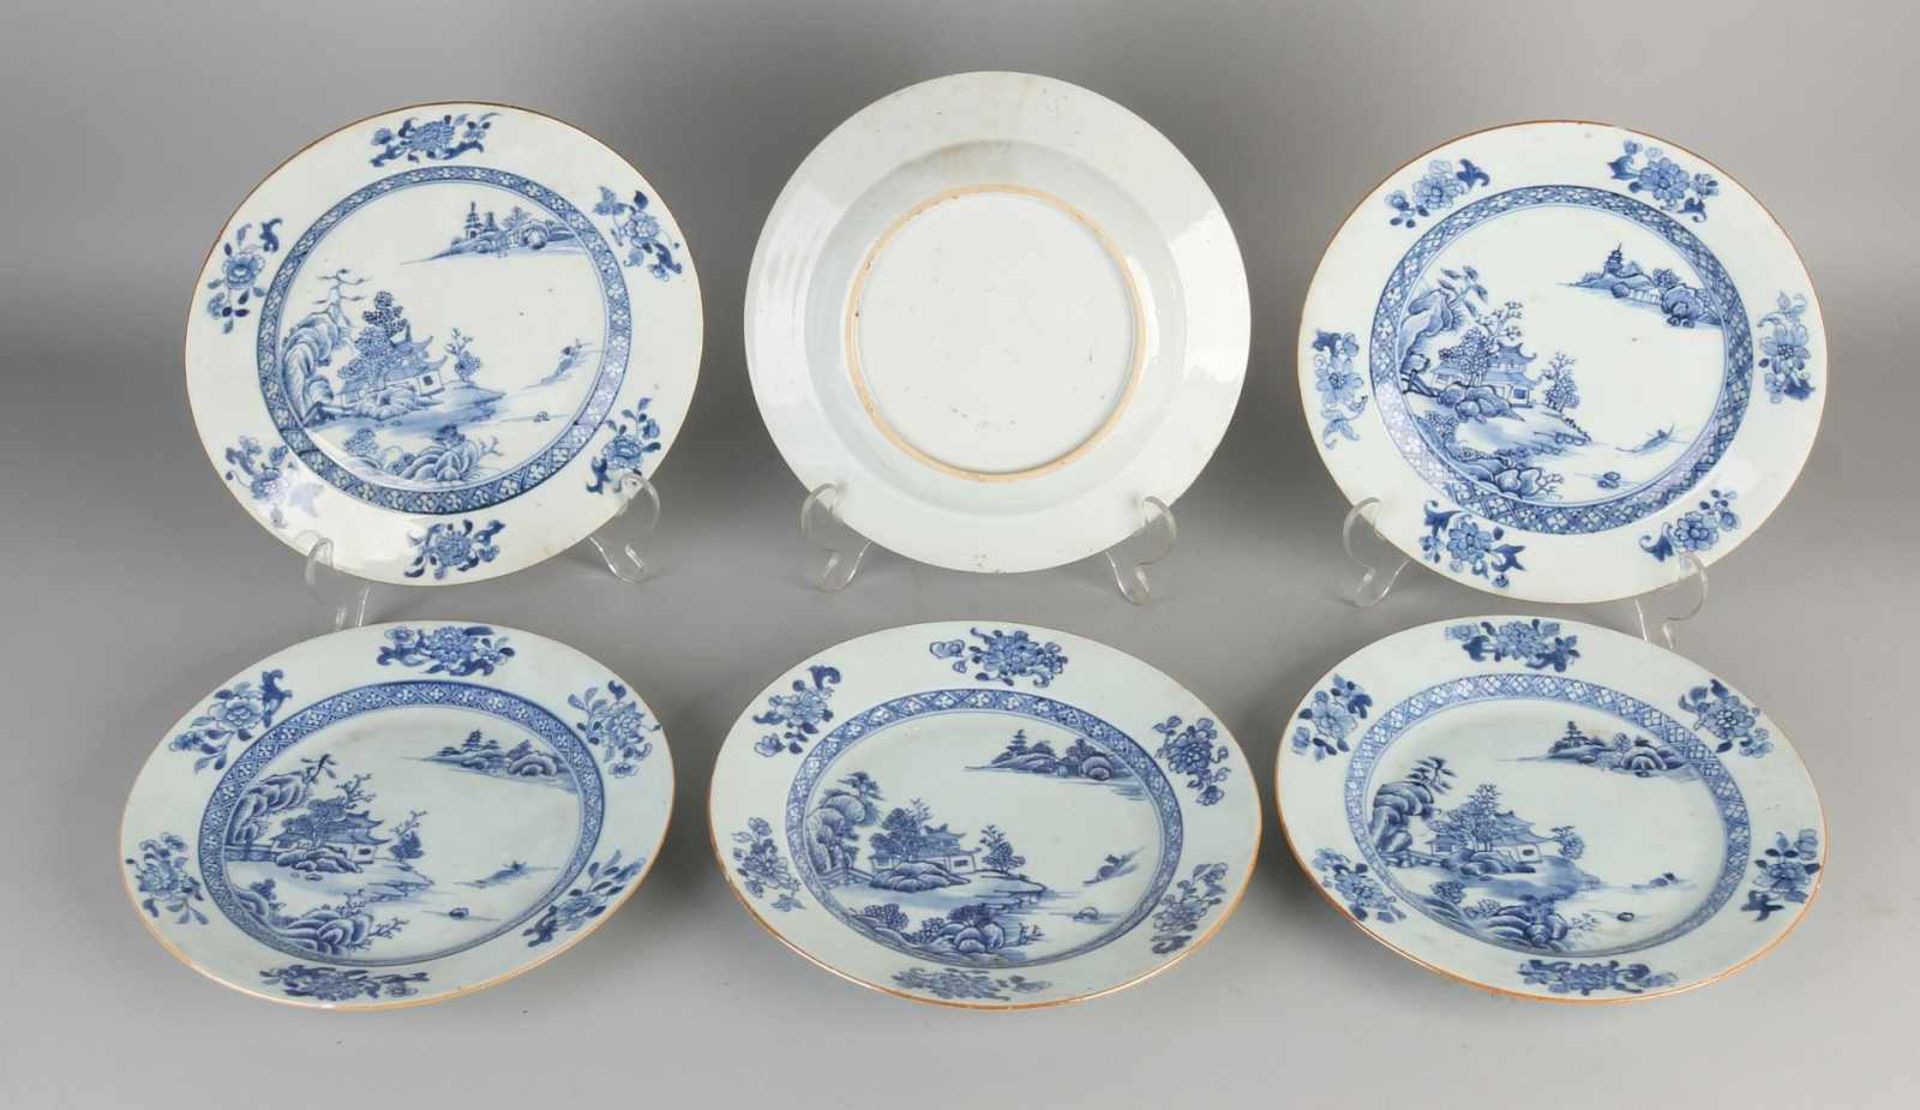 Six 18th century Chinese porcelain plates with pagodas in landscape decor. A chip, a hairline. Size: